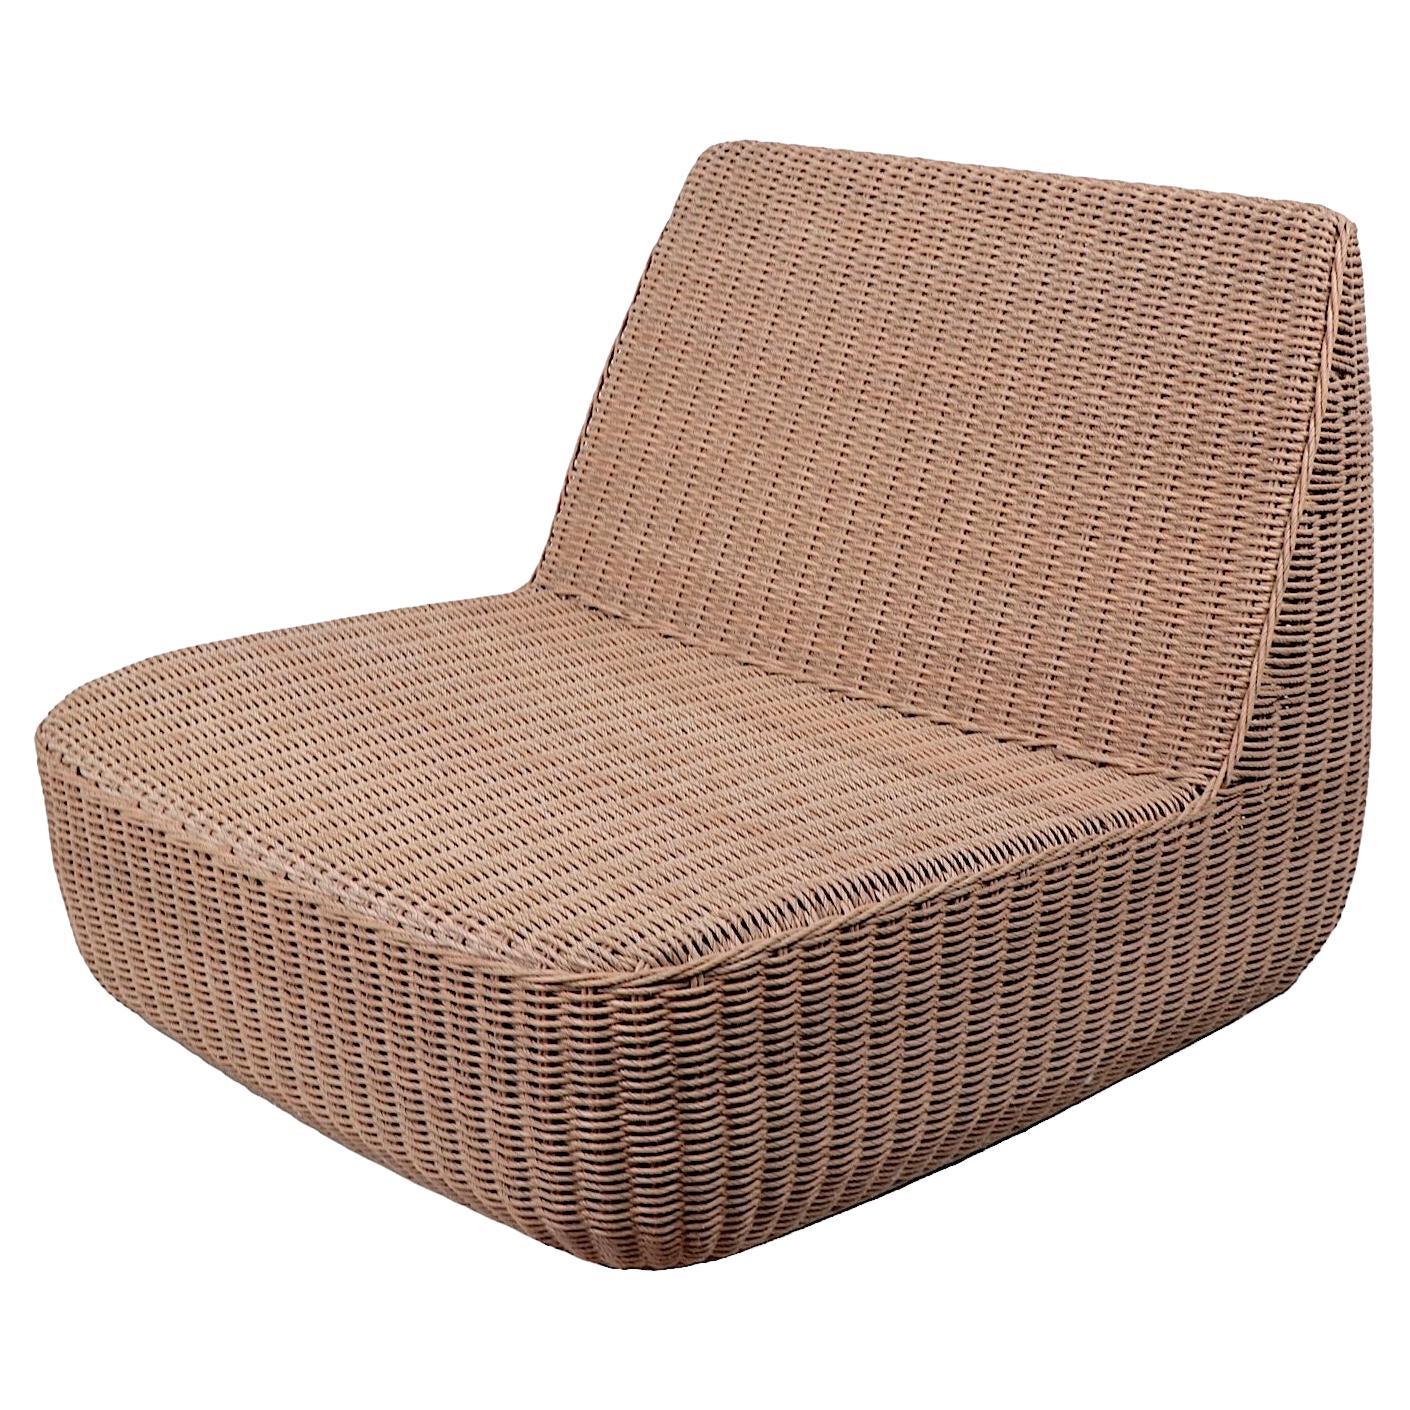 Chic, stylish and sophisticated low slung wicker lounge chair designed by Mark Gabbertas, for Gloster as part of the classic Omaha series. The chair is constructed of a wicker shell, over a metal structure. The wicker is treated which allows for